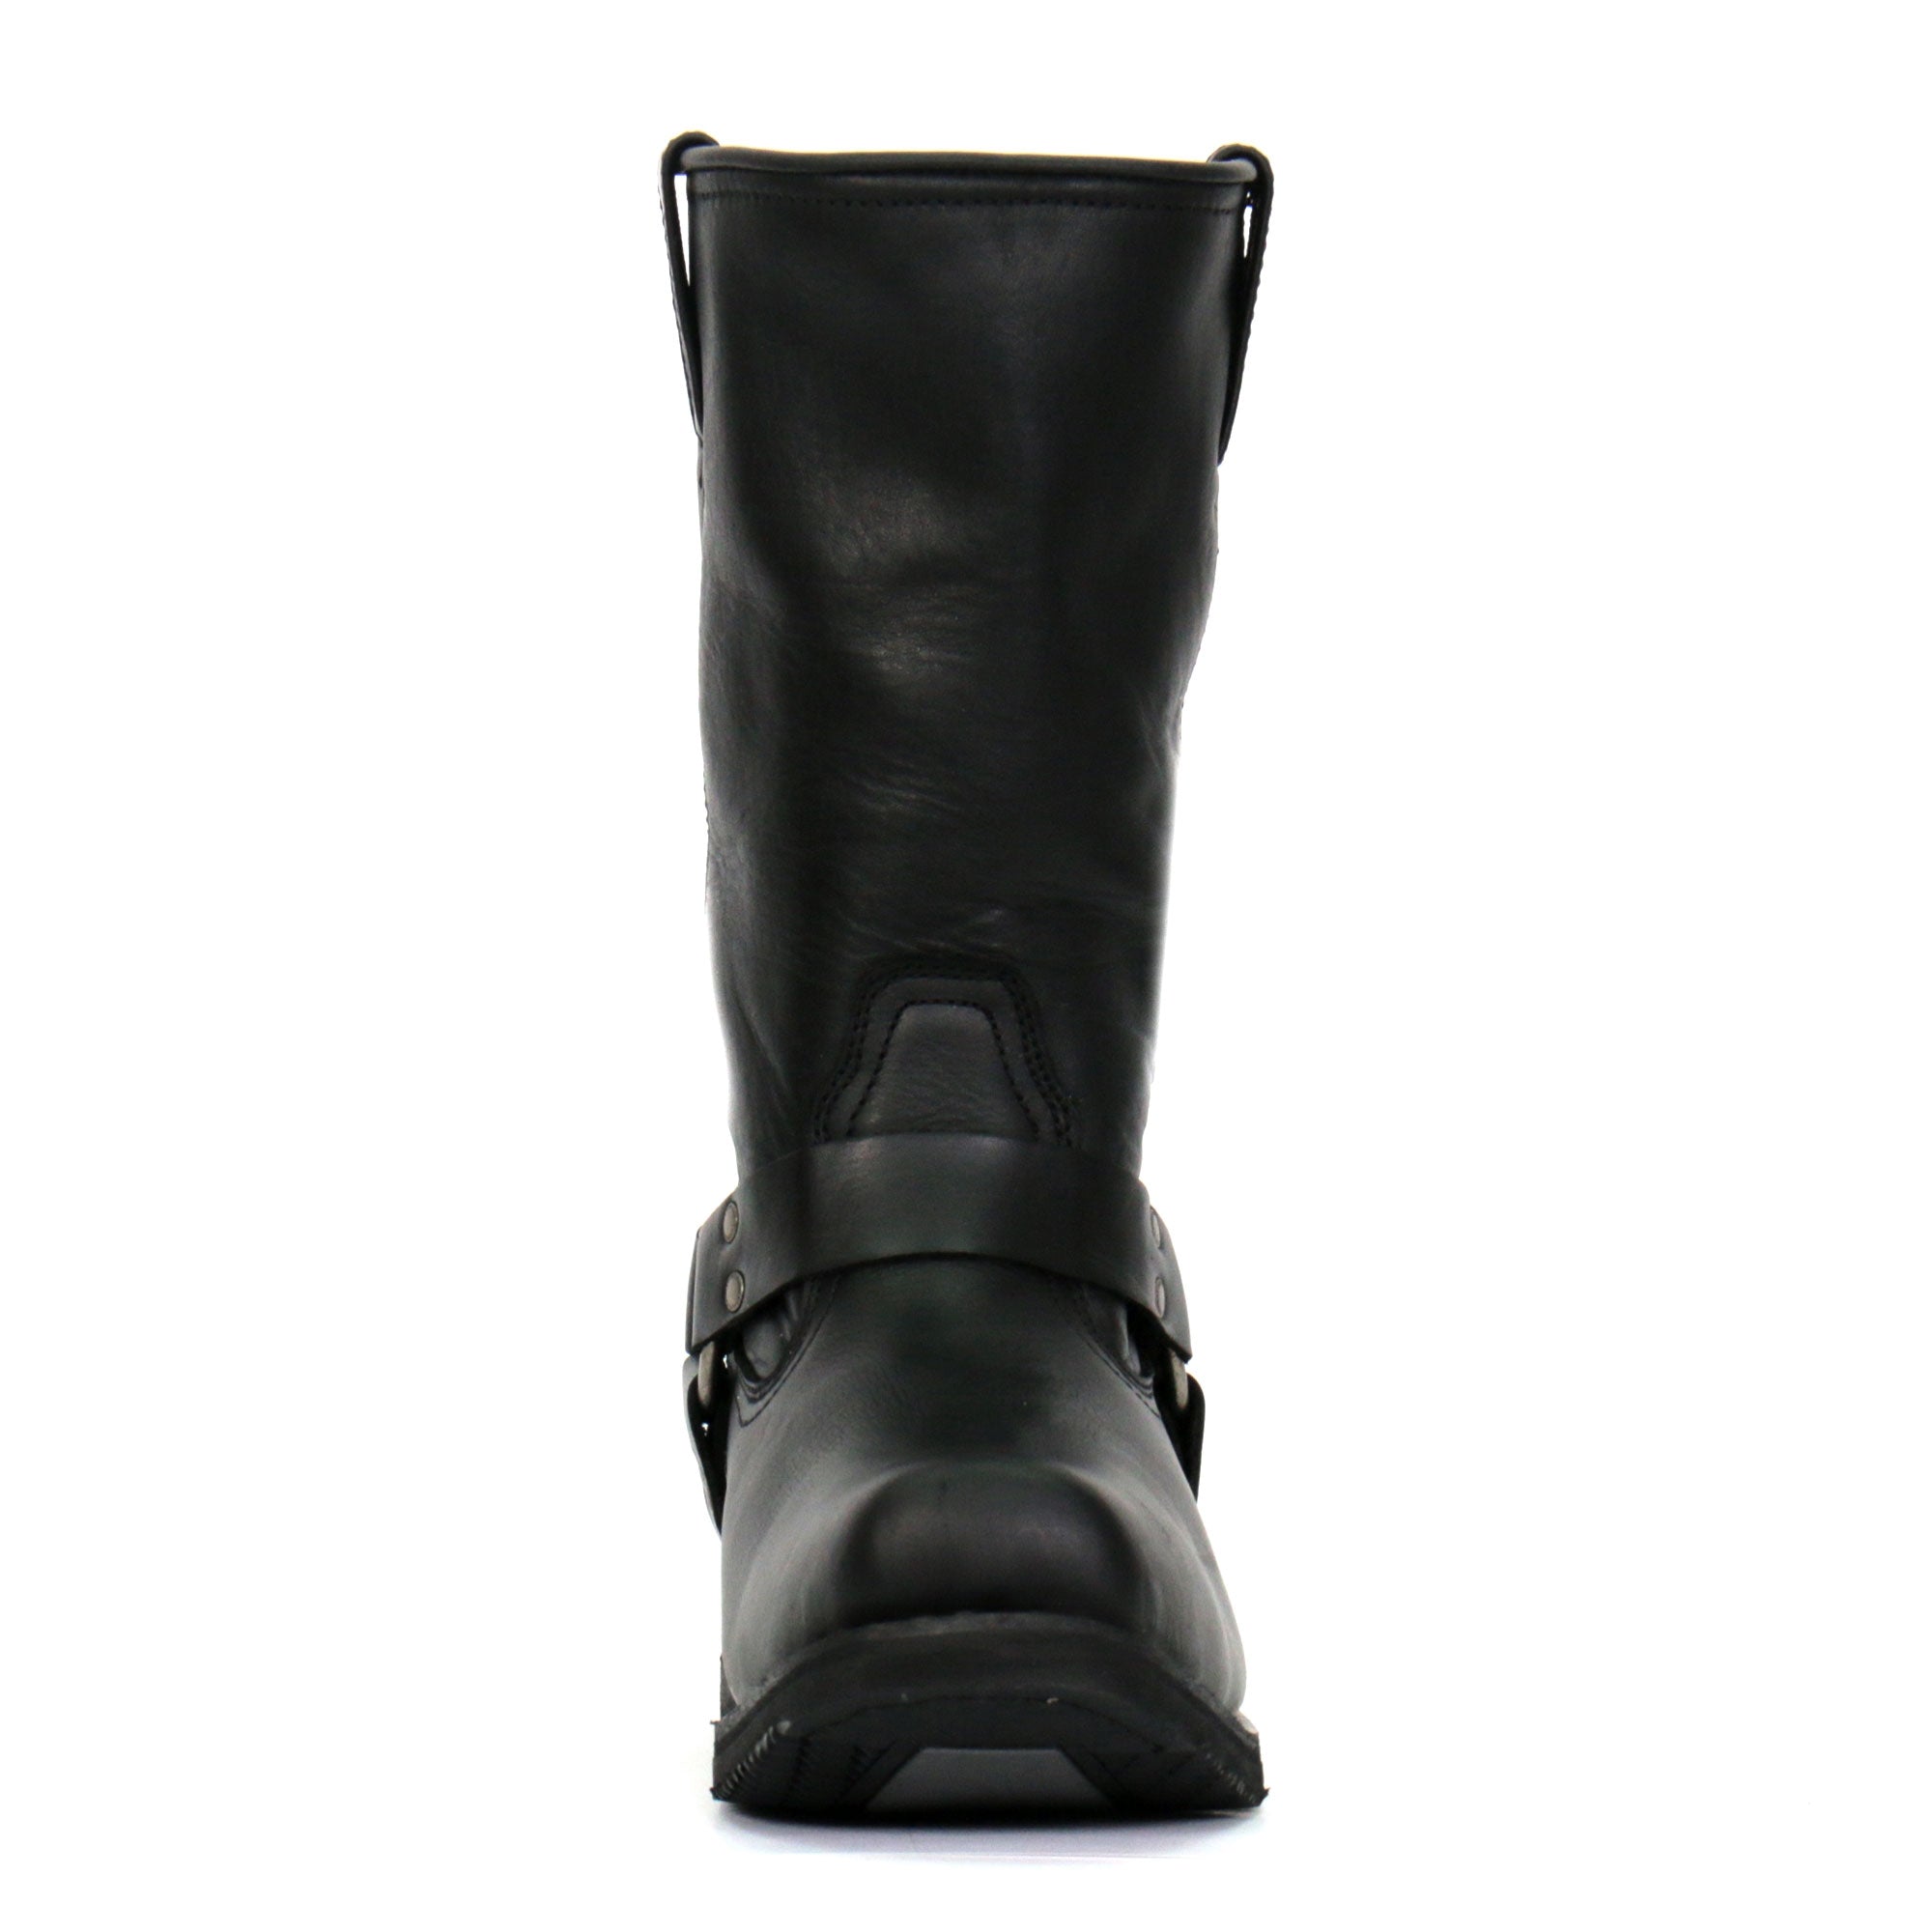 Hot Leathers BTM1016 Men's Classic Black 11-inch Harness Leather Boots